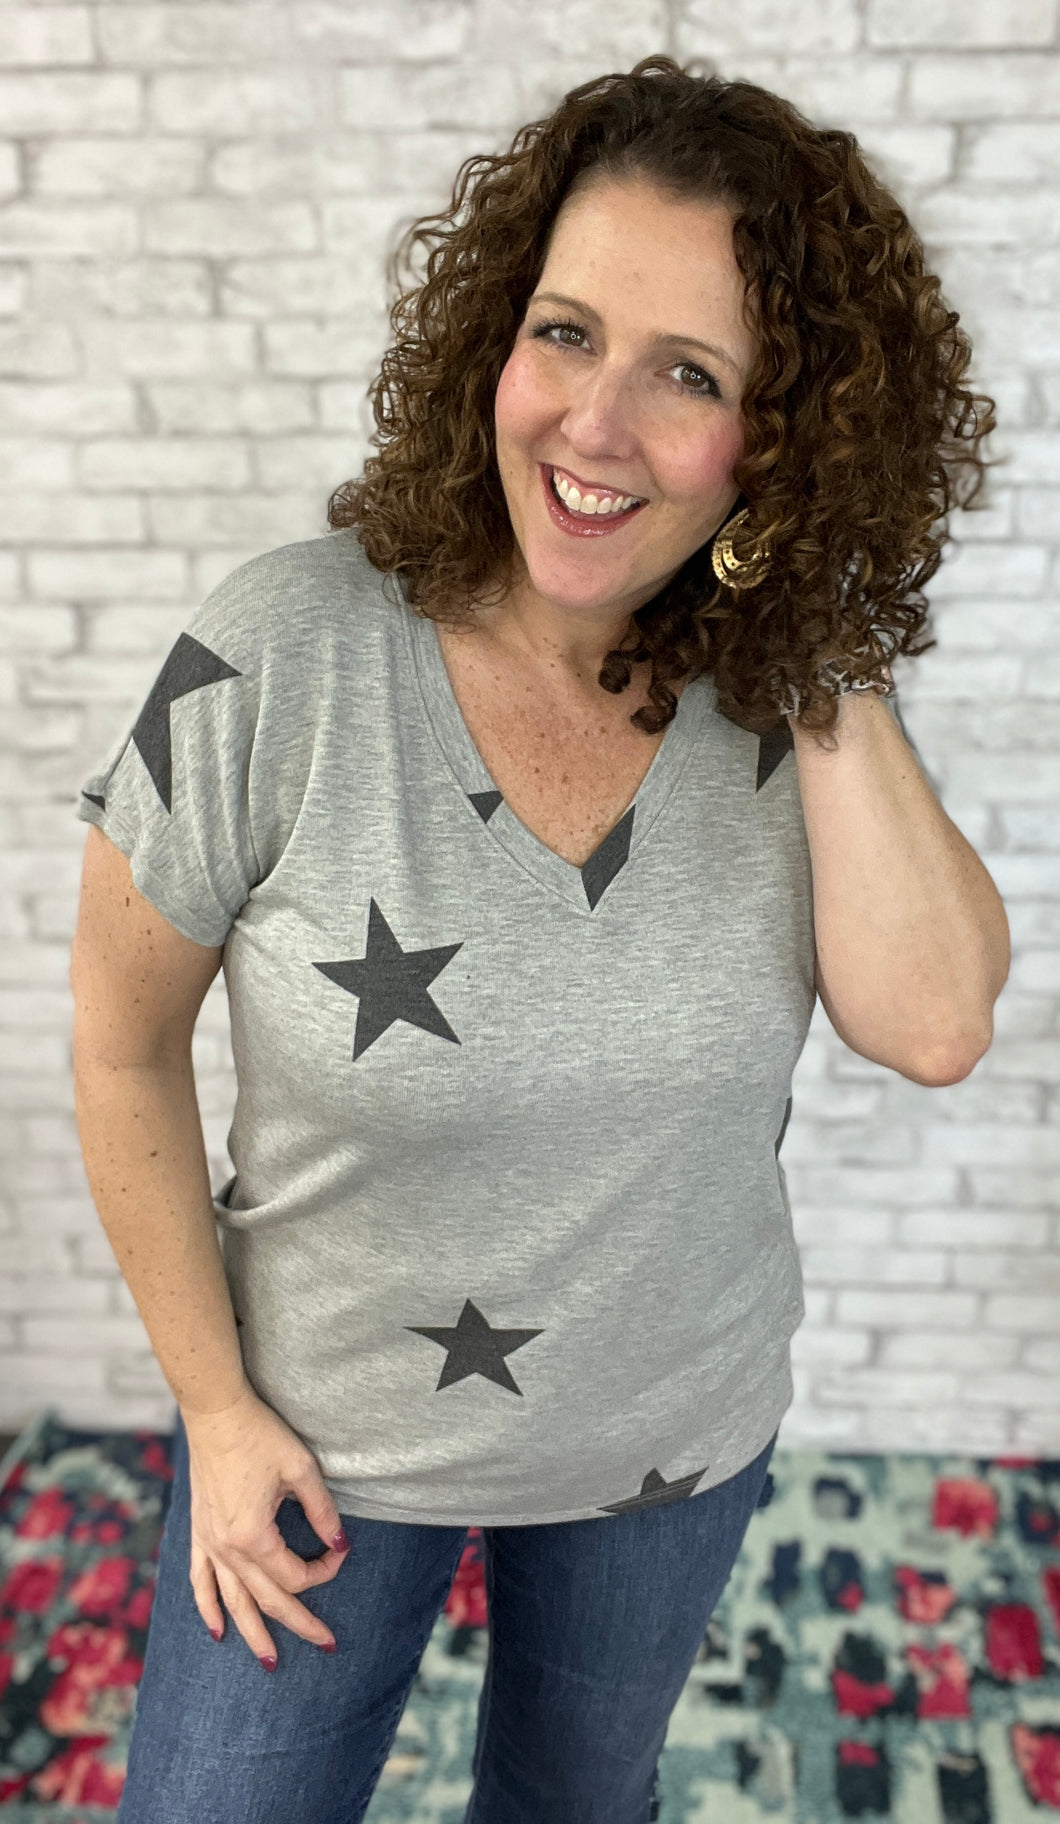 Star French Terry Top